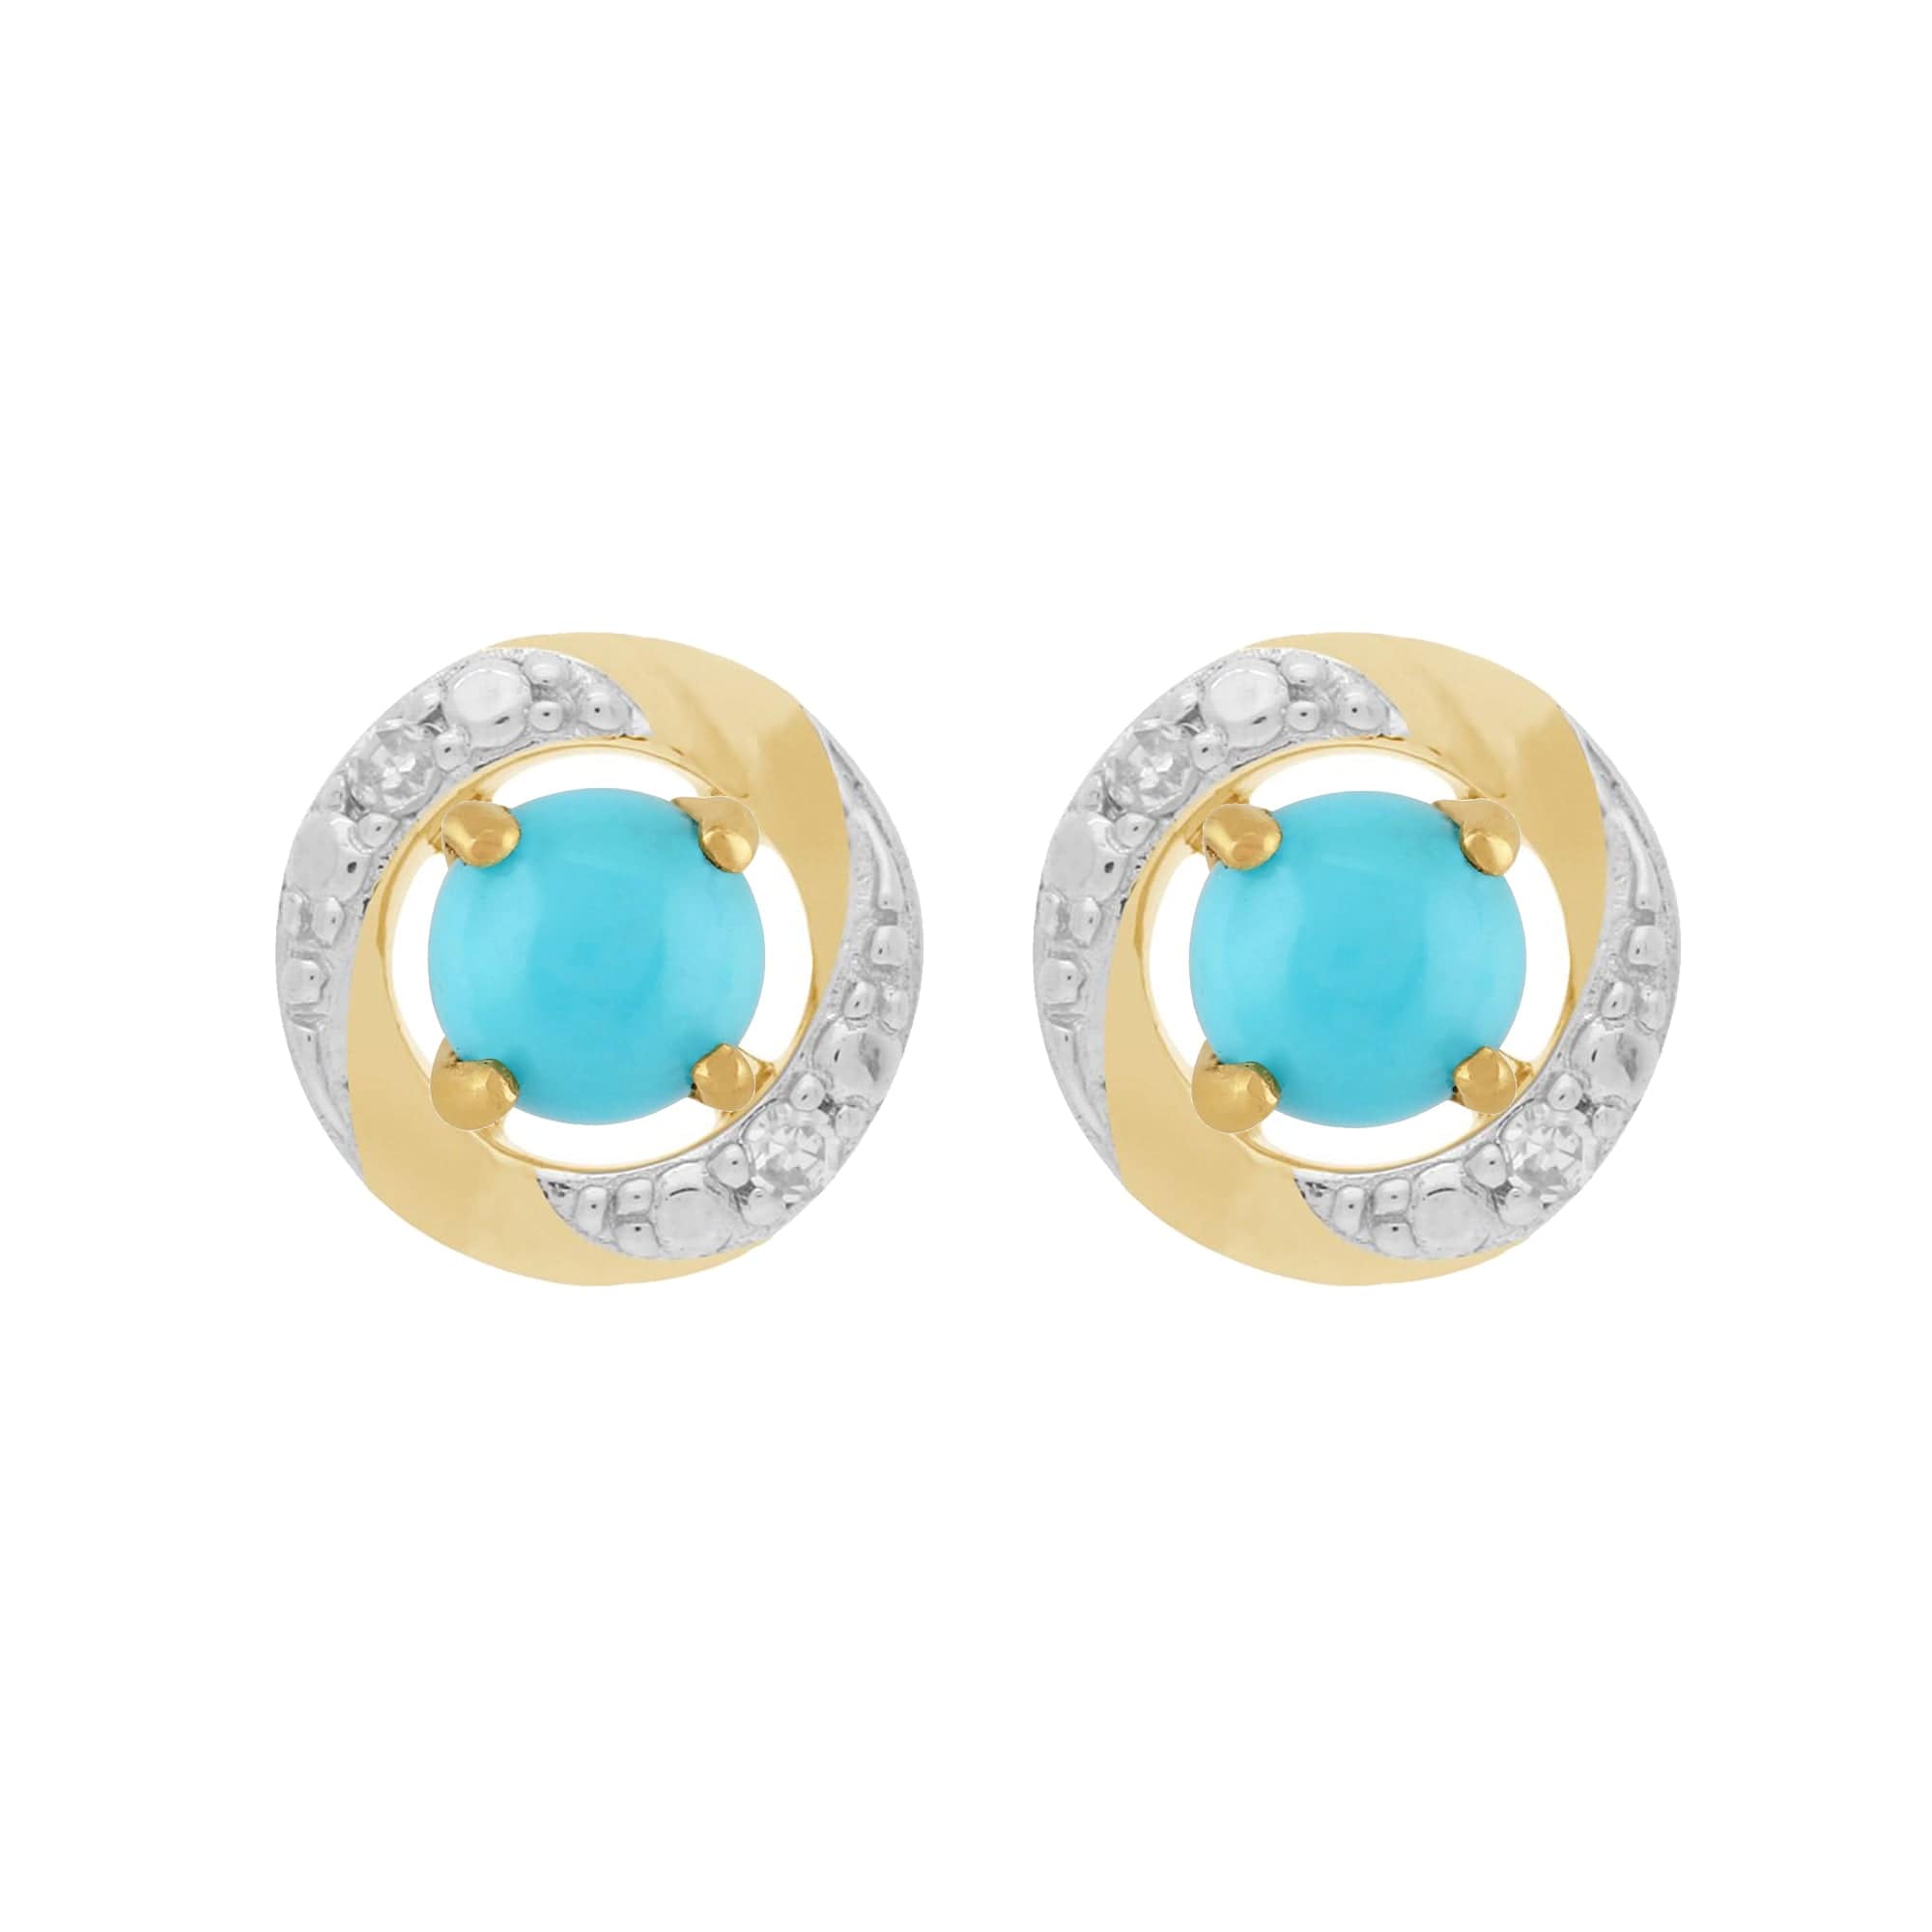 26945-191E0374019 Classic Round Turquoise Stud Earrings with Detachable Diamond Halo Ear Jacket in 9ct Yellow Gold 1